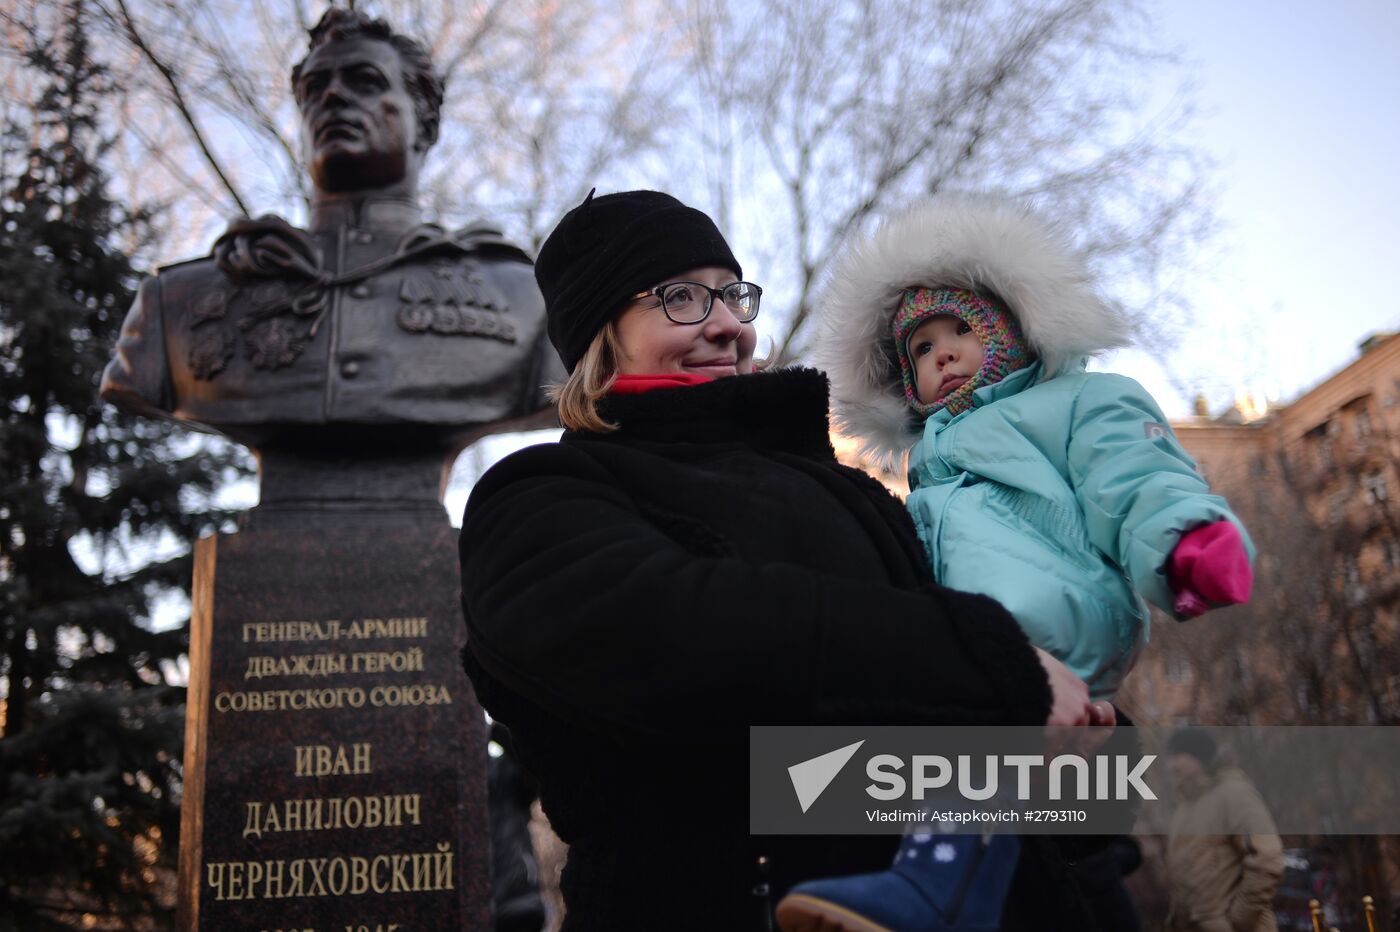 Bust of General Chernyakhovsky unveiled